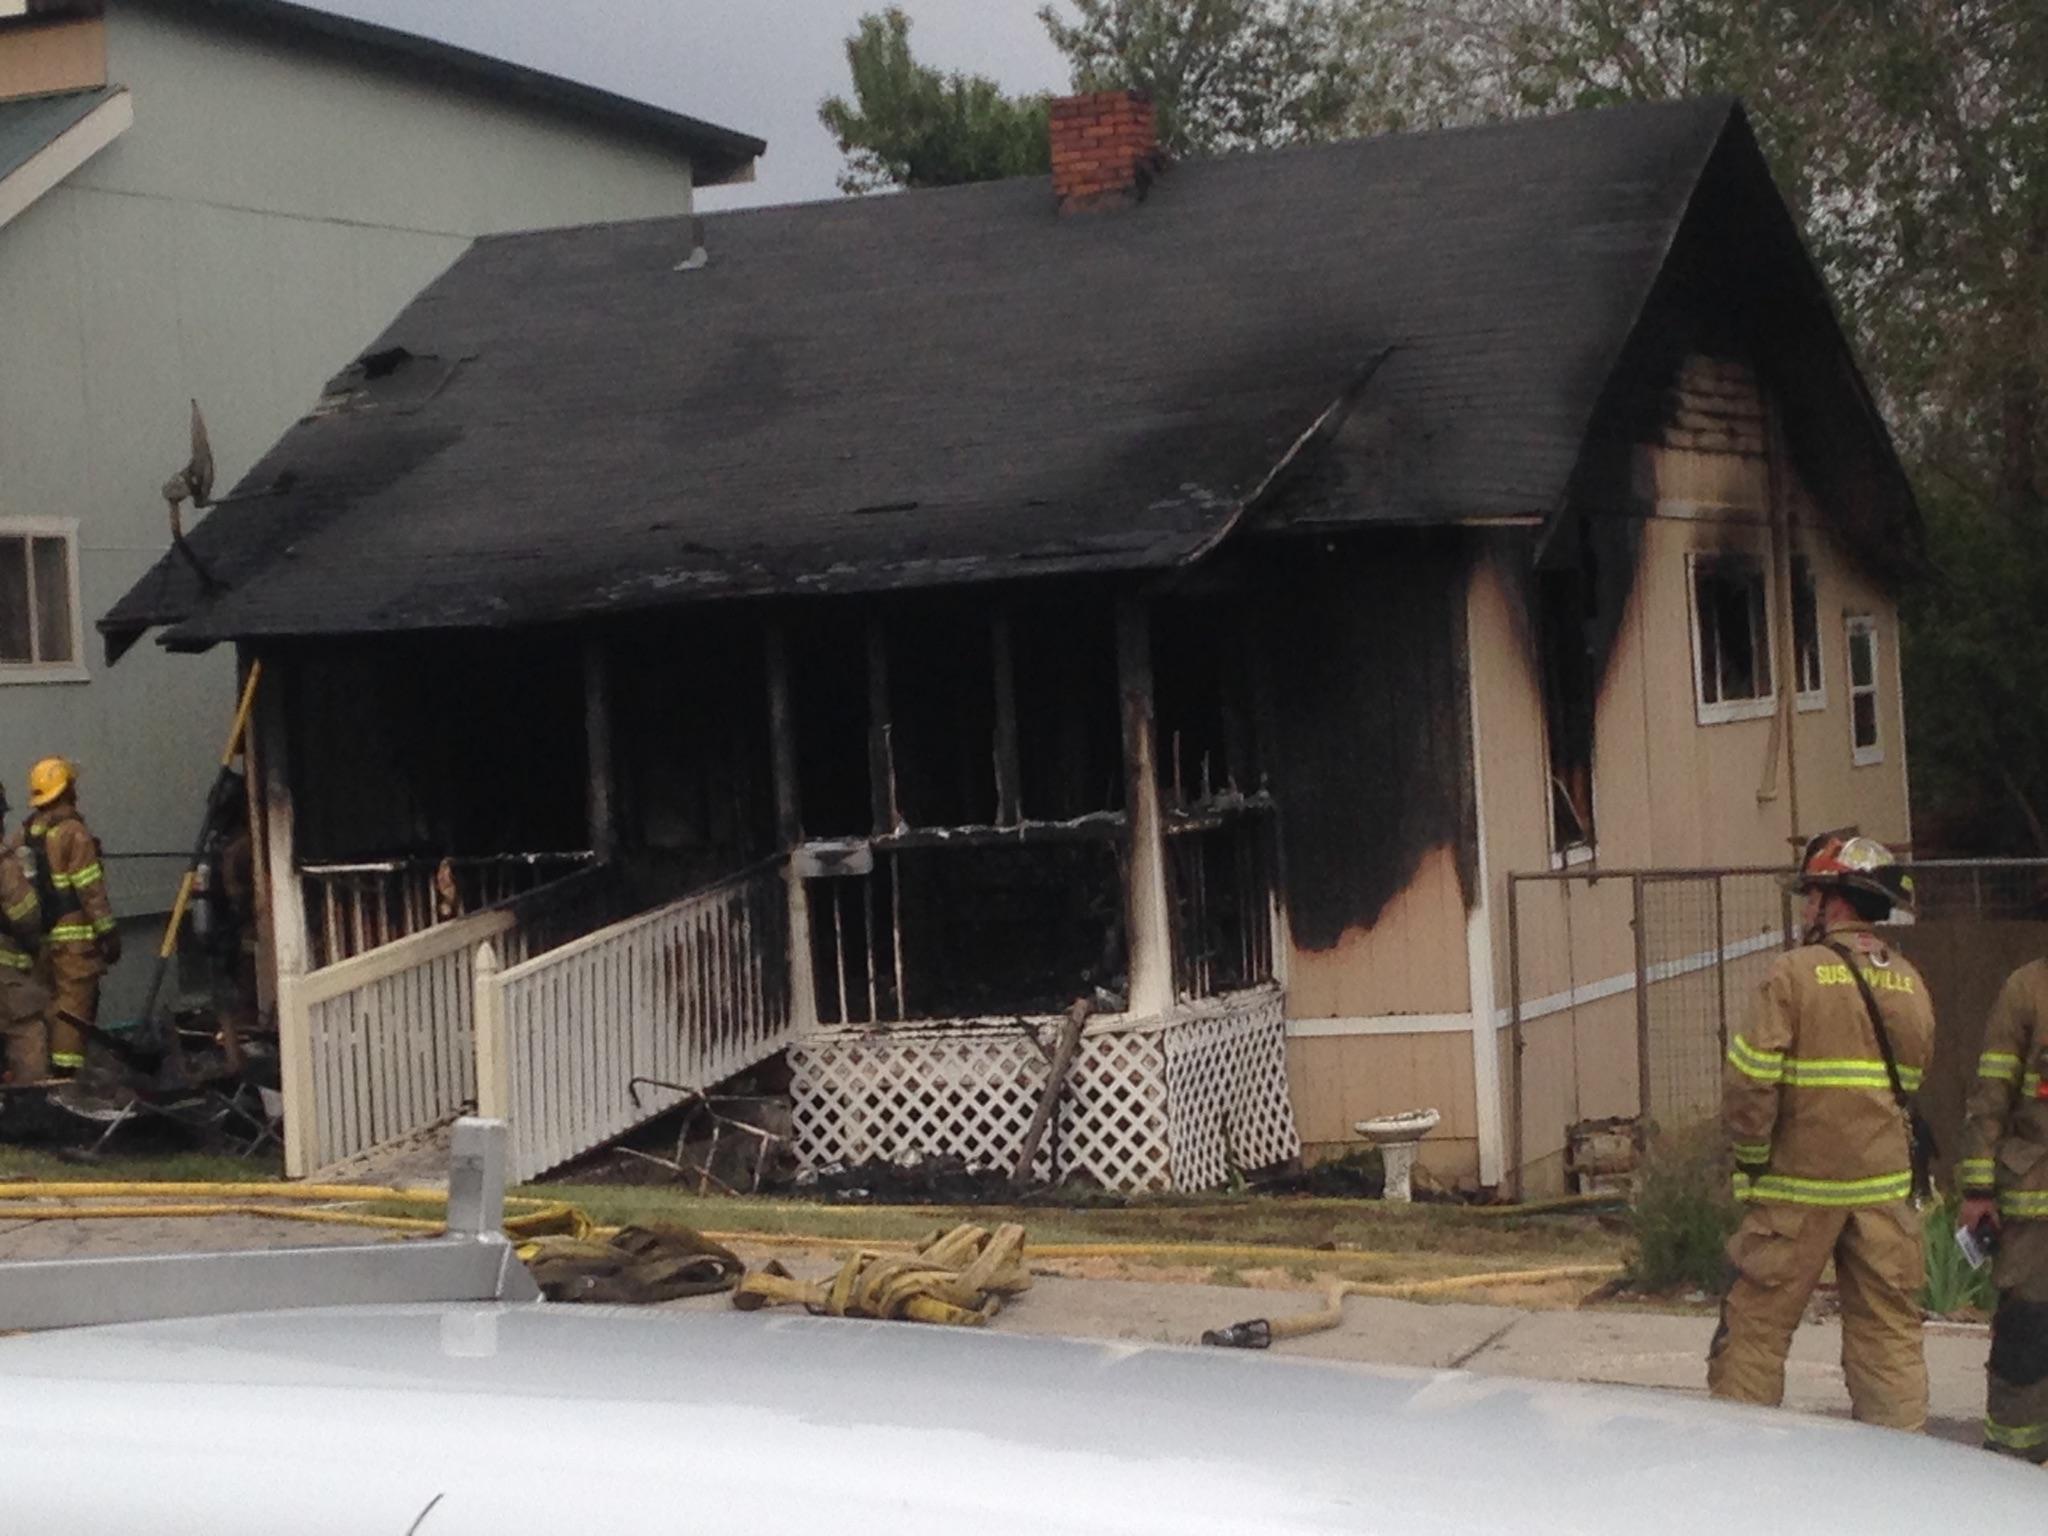 Fundraiser by tonya sherwood appell : my house burned down may 13